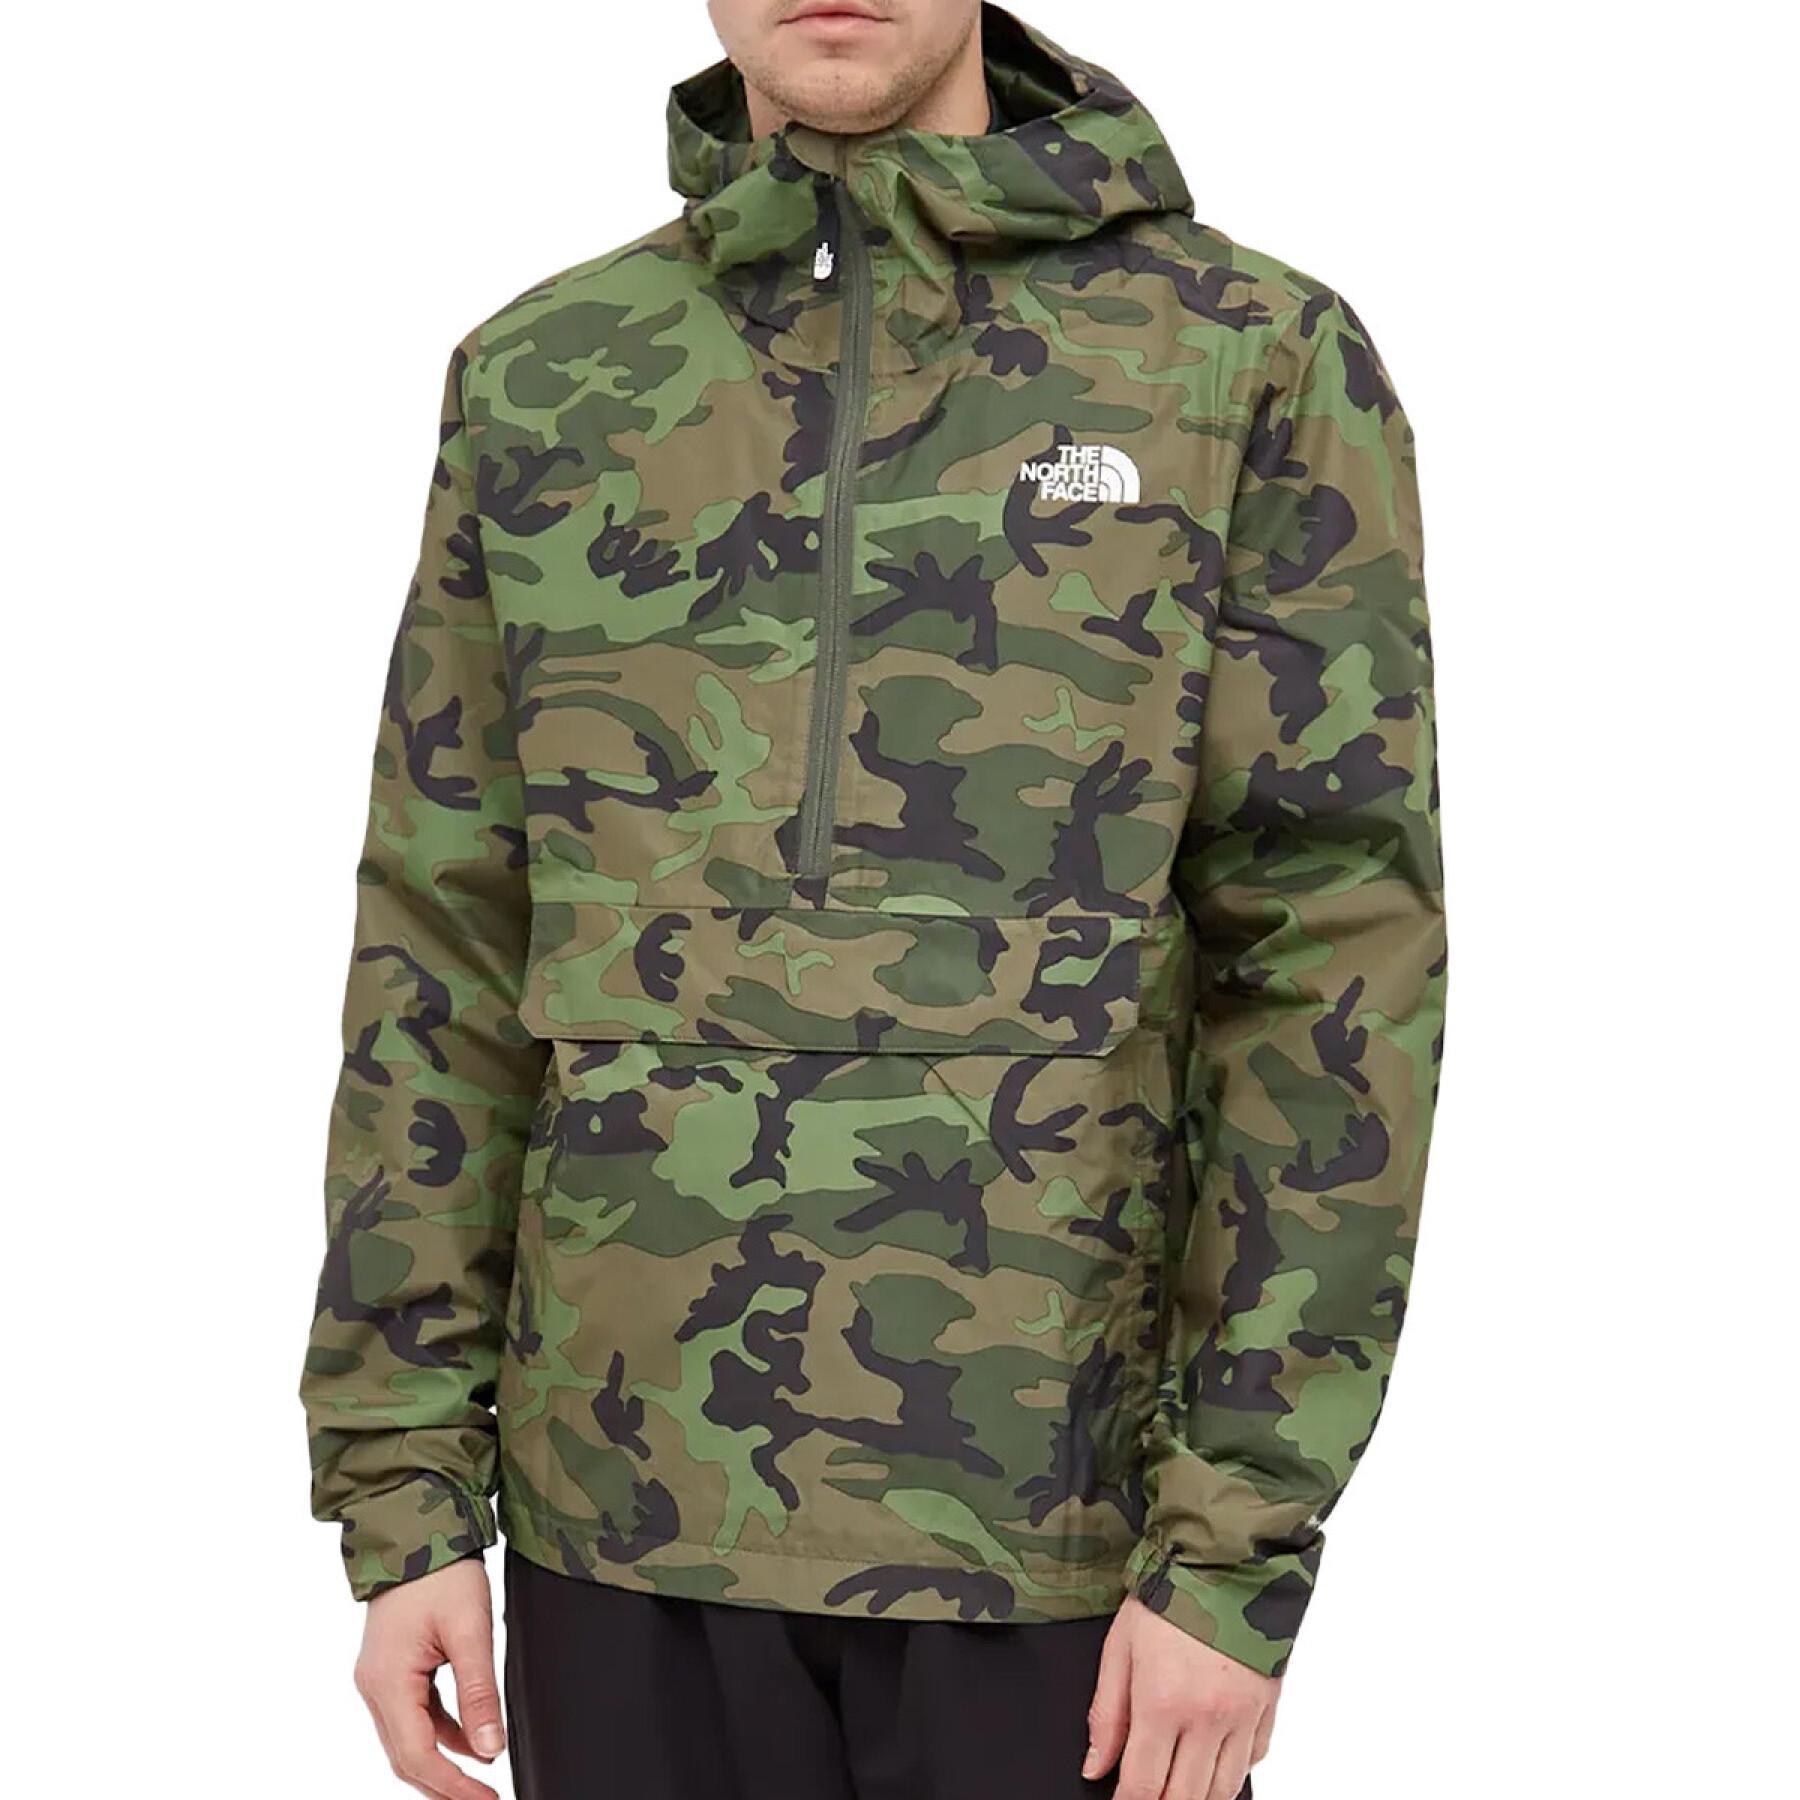 Waterproof anorak The North Face